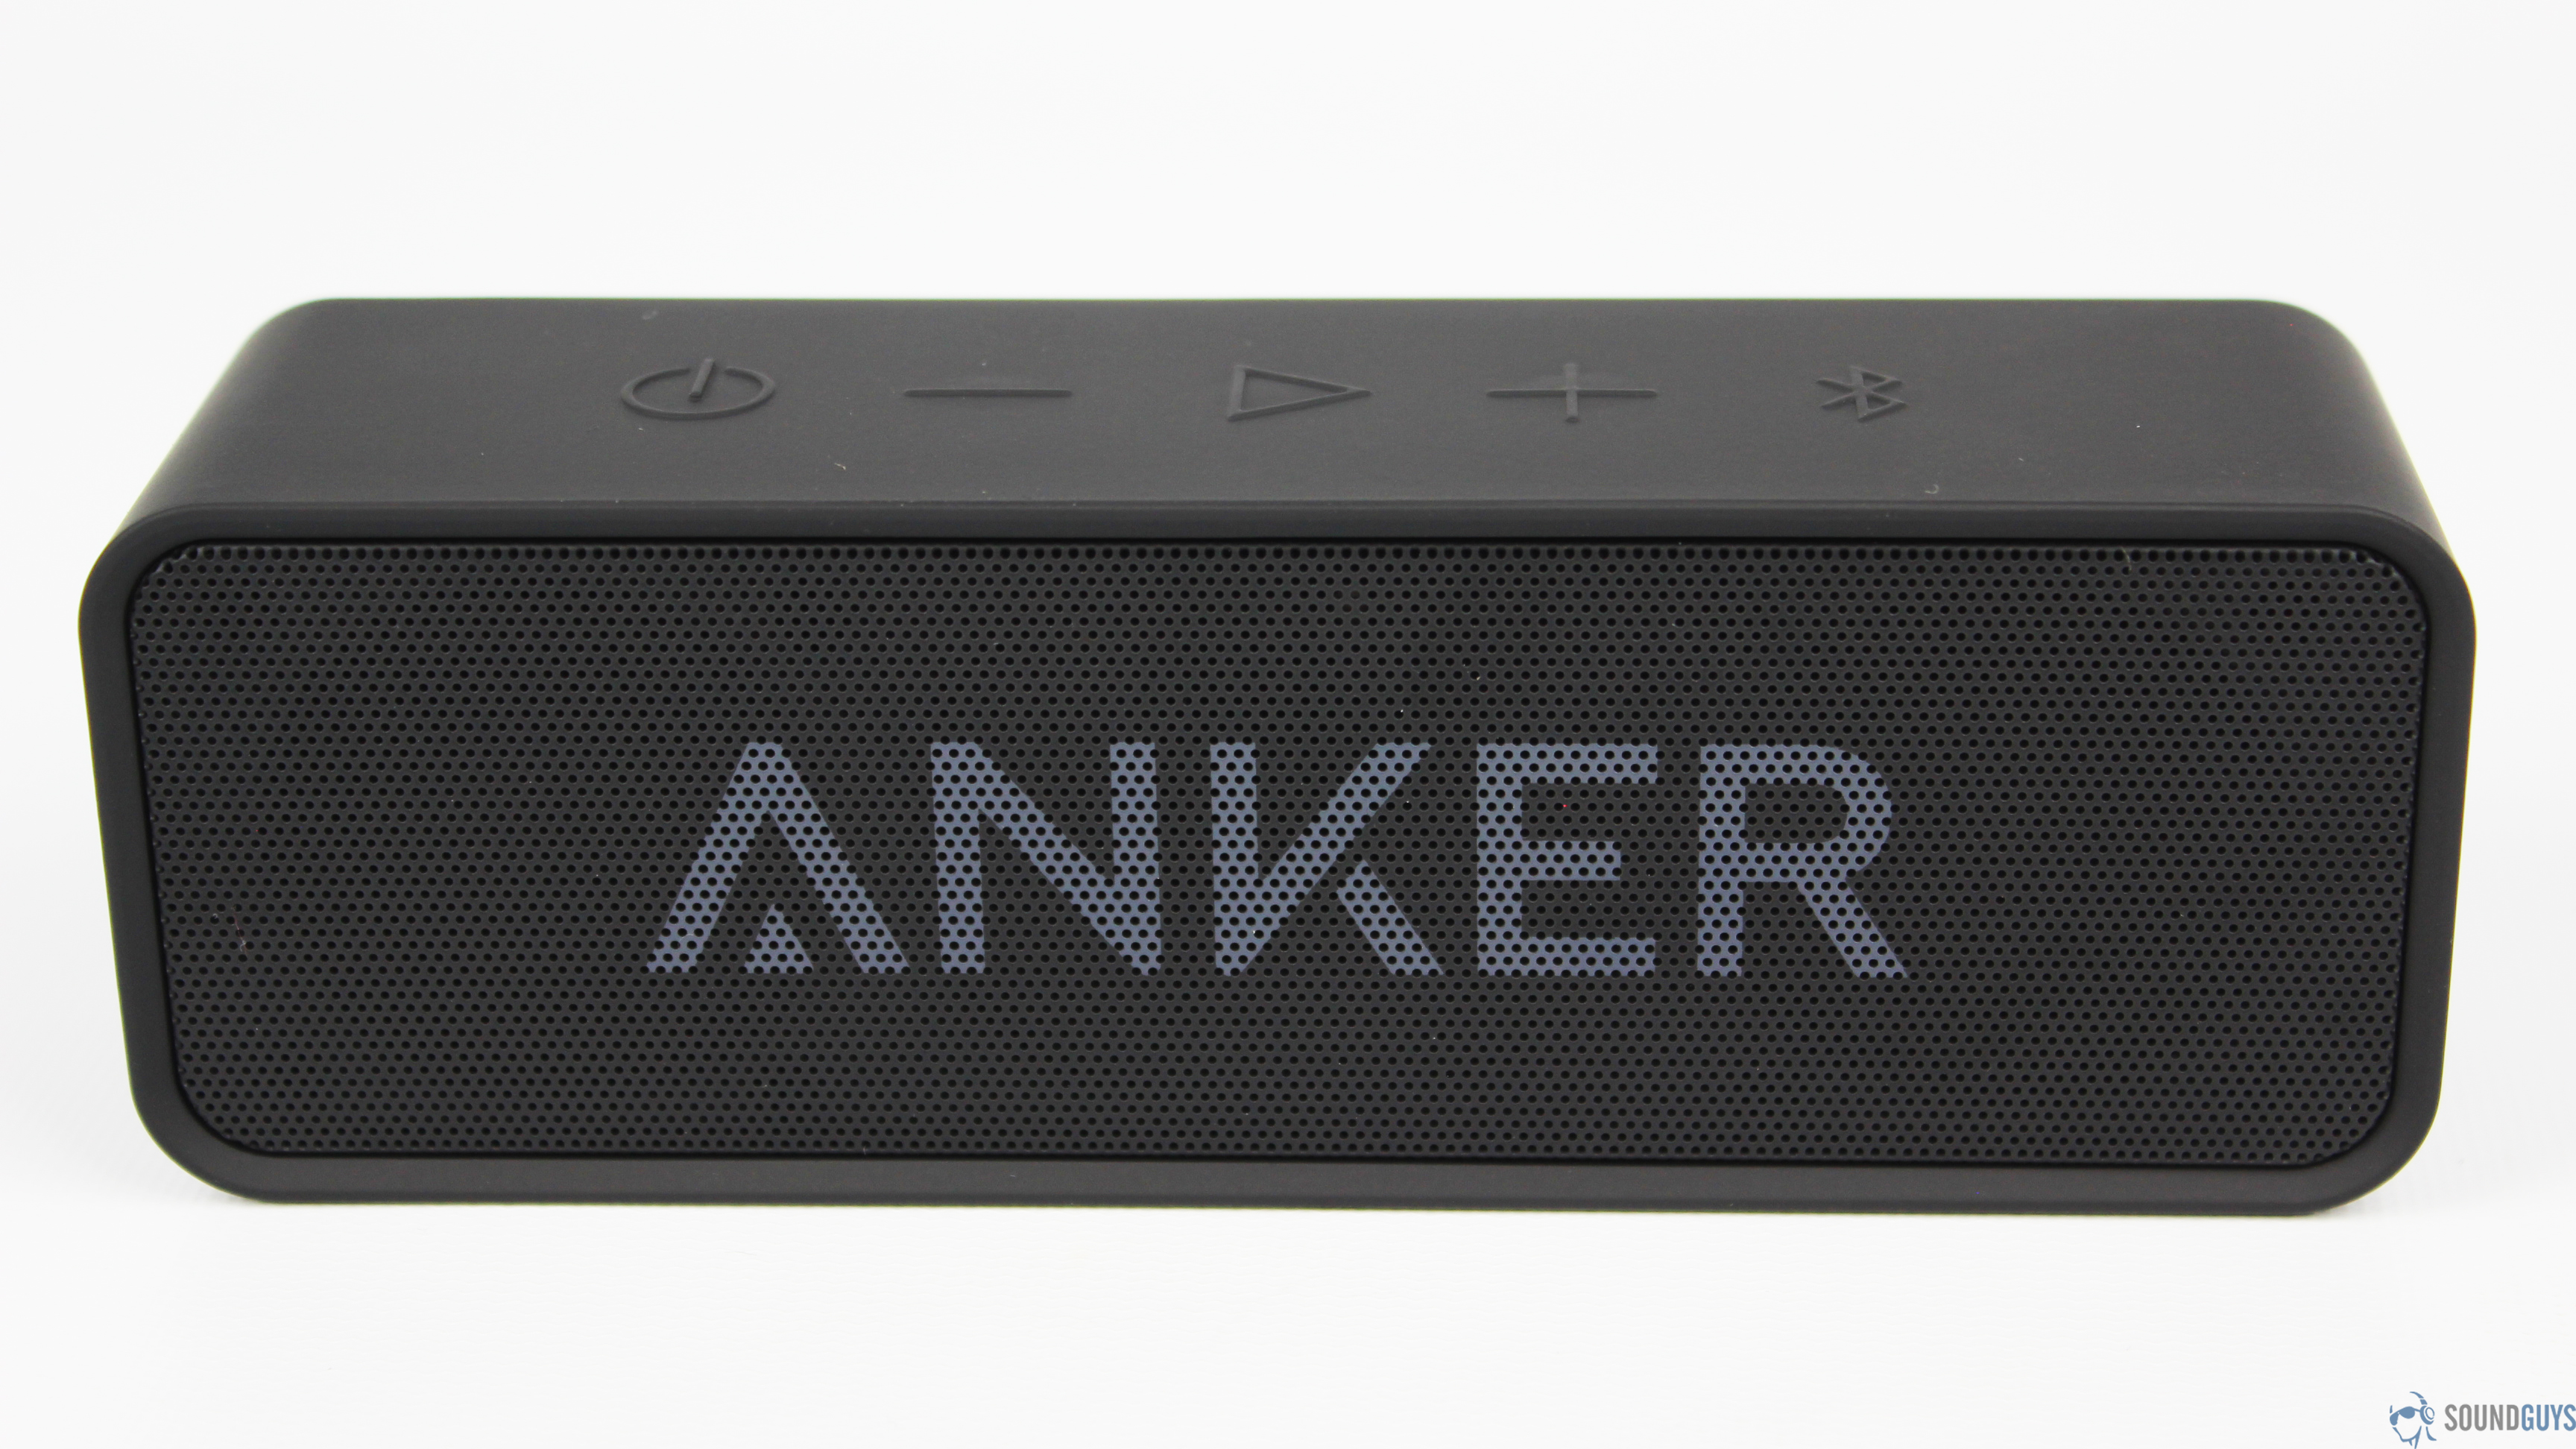 AnkerSoundcore front side